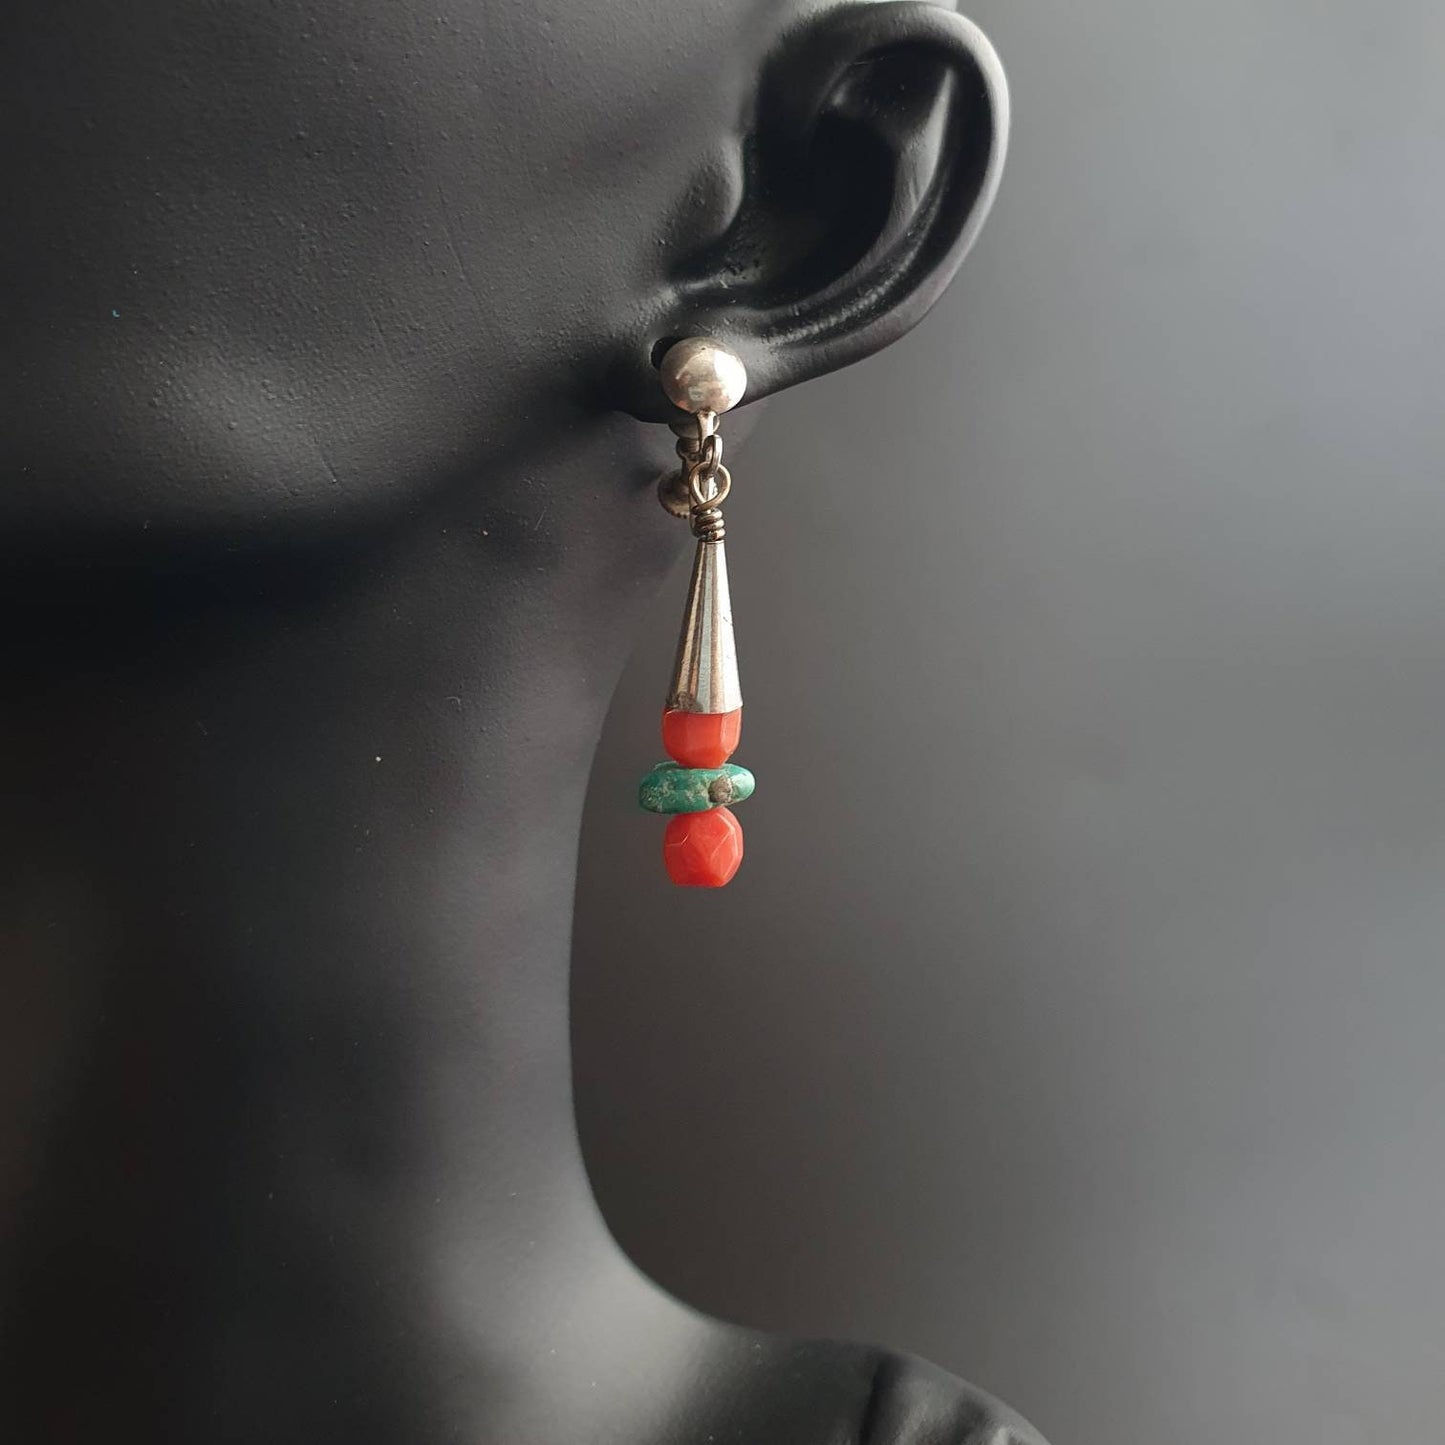 Dangle silver boho earrings, Round Bali earrings, gifts for her birthday gifts for her, ready to ship, Natural Gemstone Coral